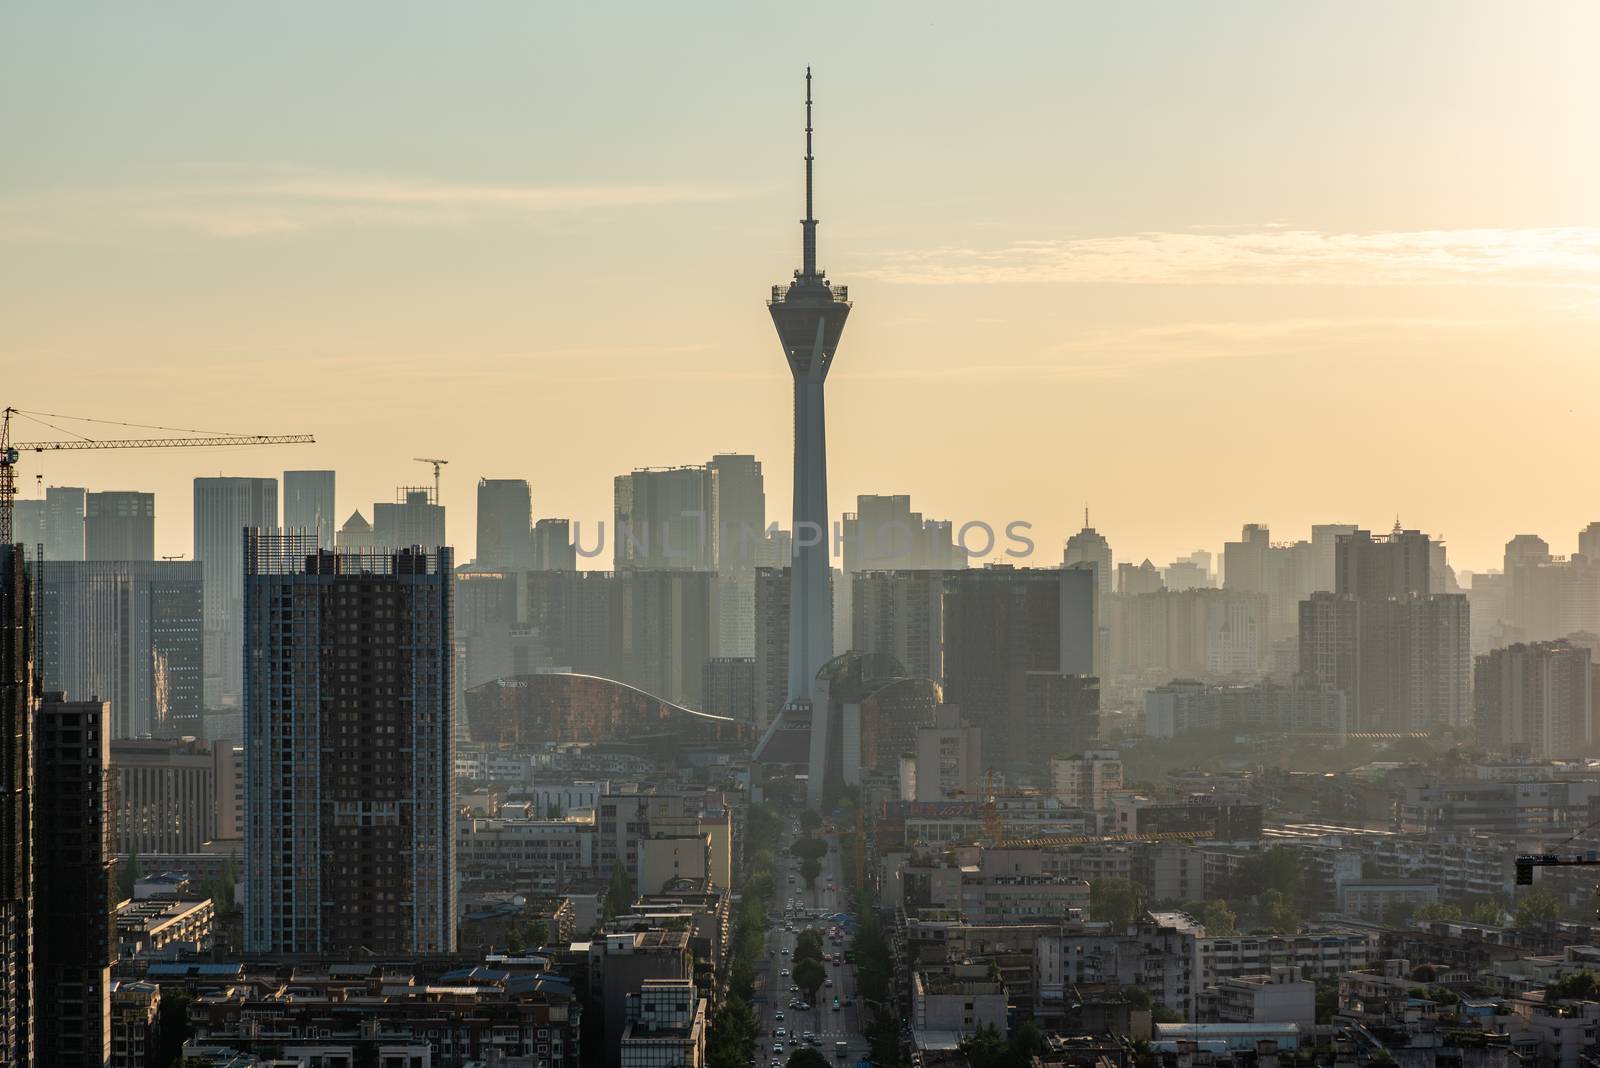 Chengdu 339 TV tower and city skyline aerial view in late afternoon by LP2Studio